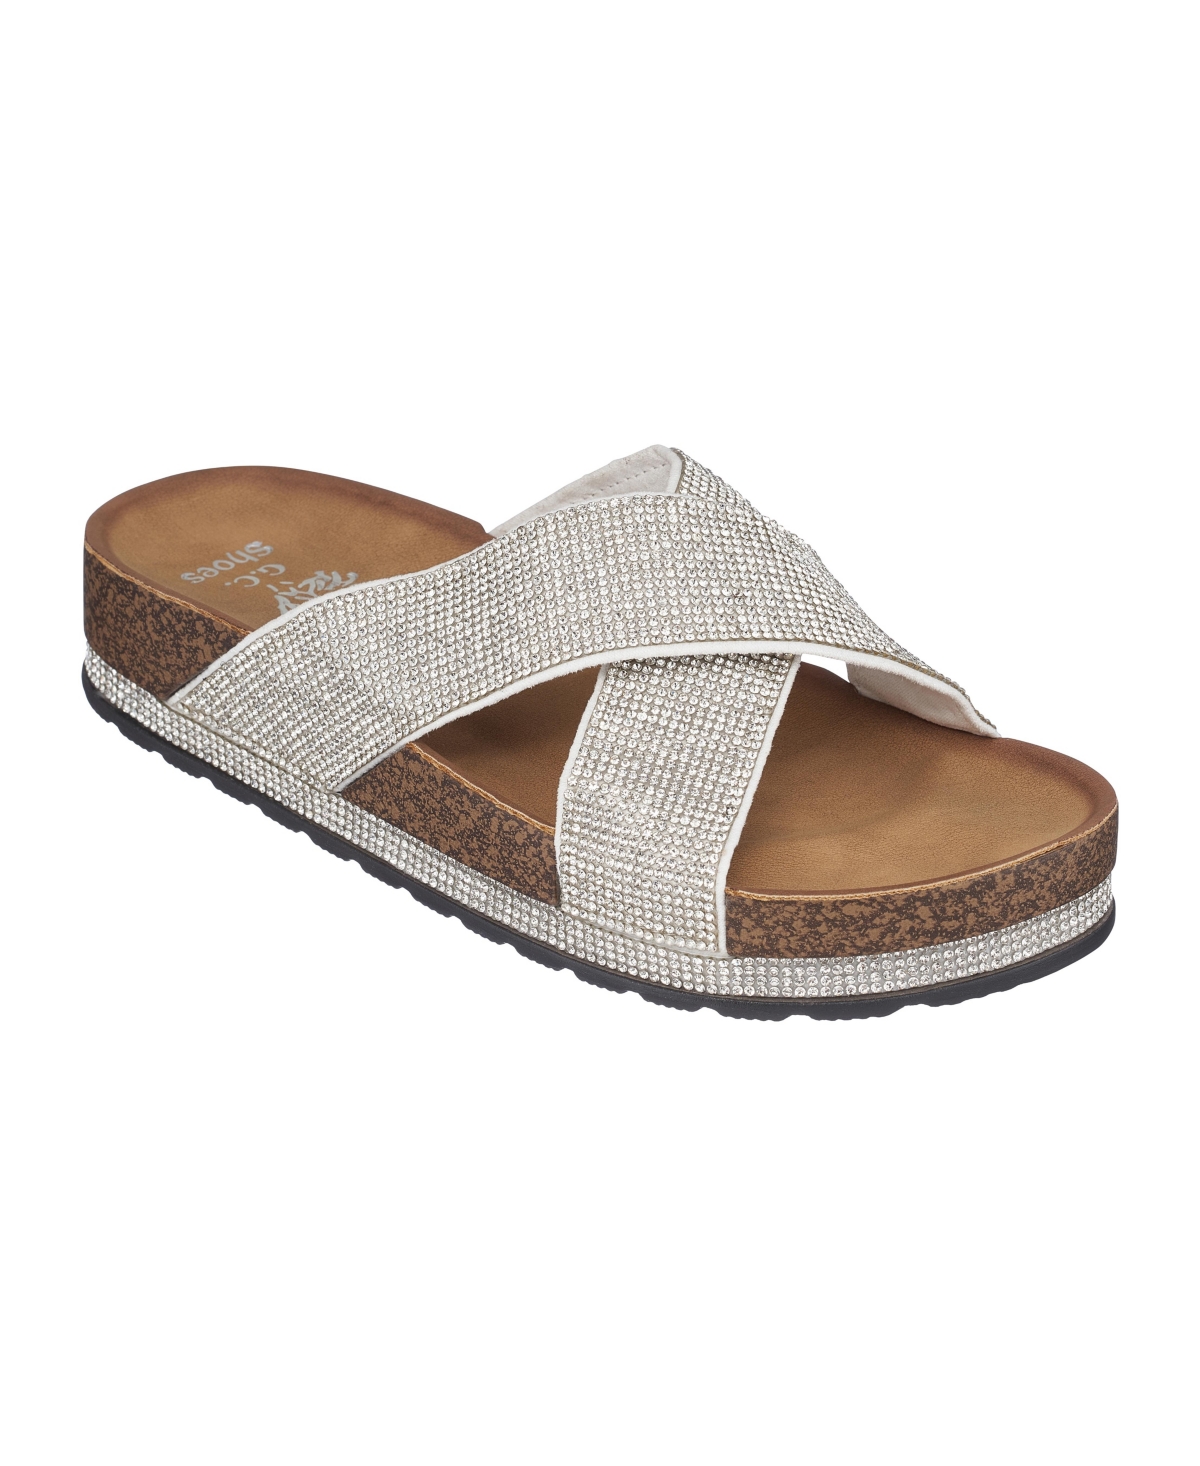 Women's Ariane Footbed Sandals - Silver